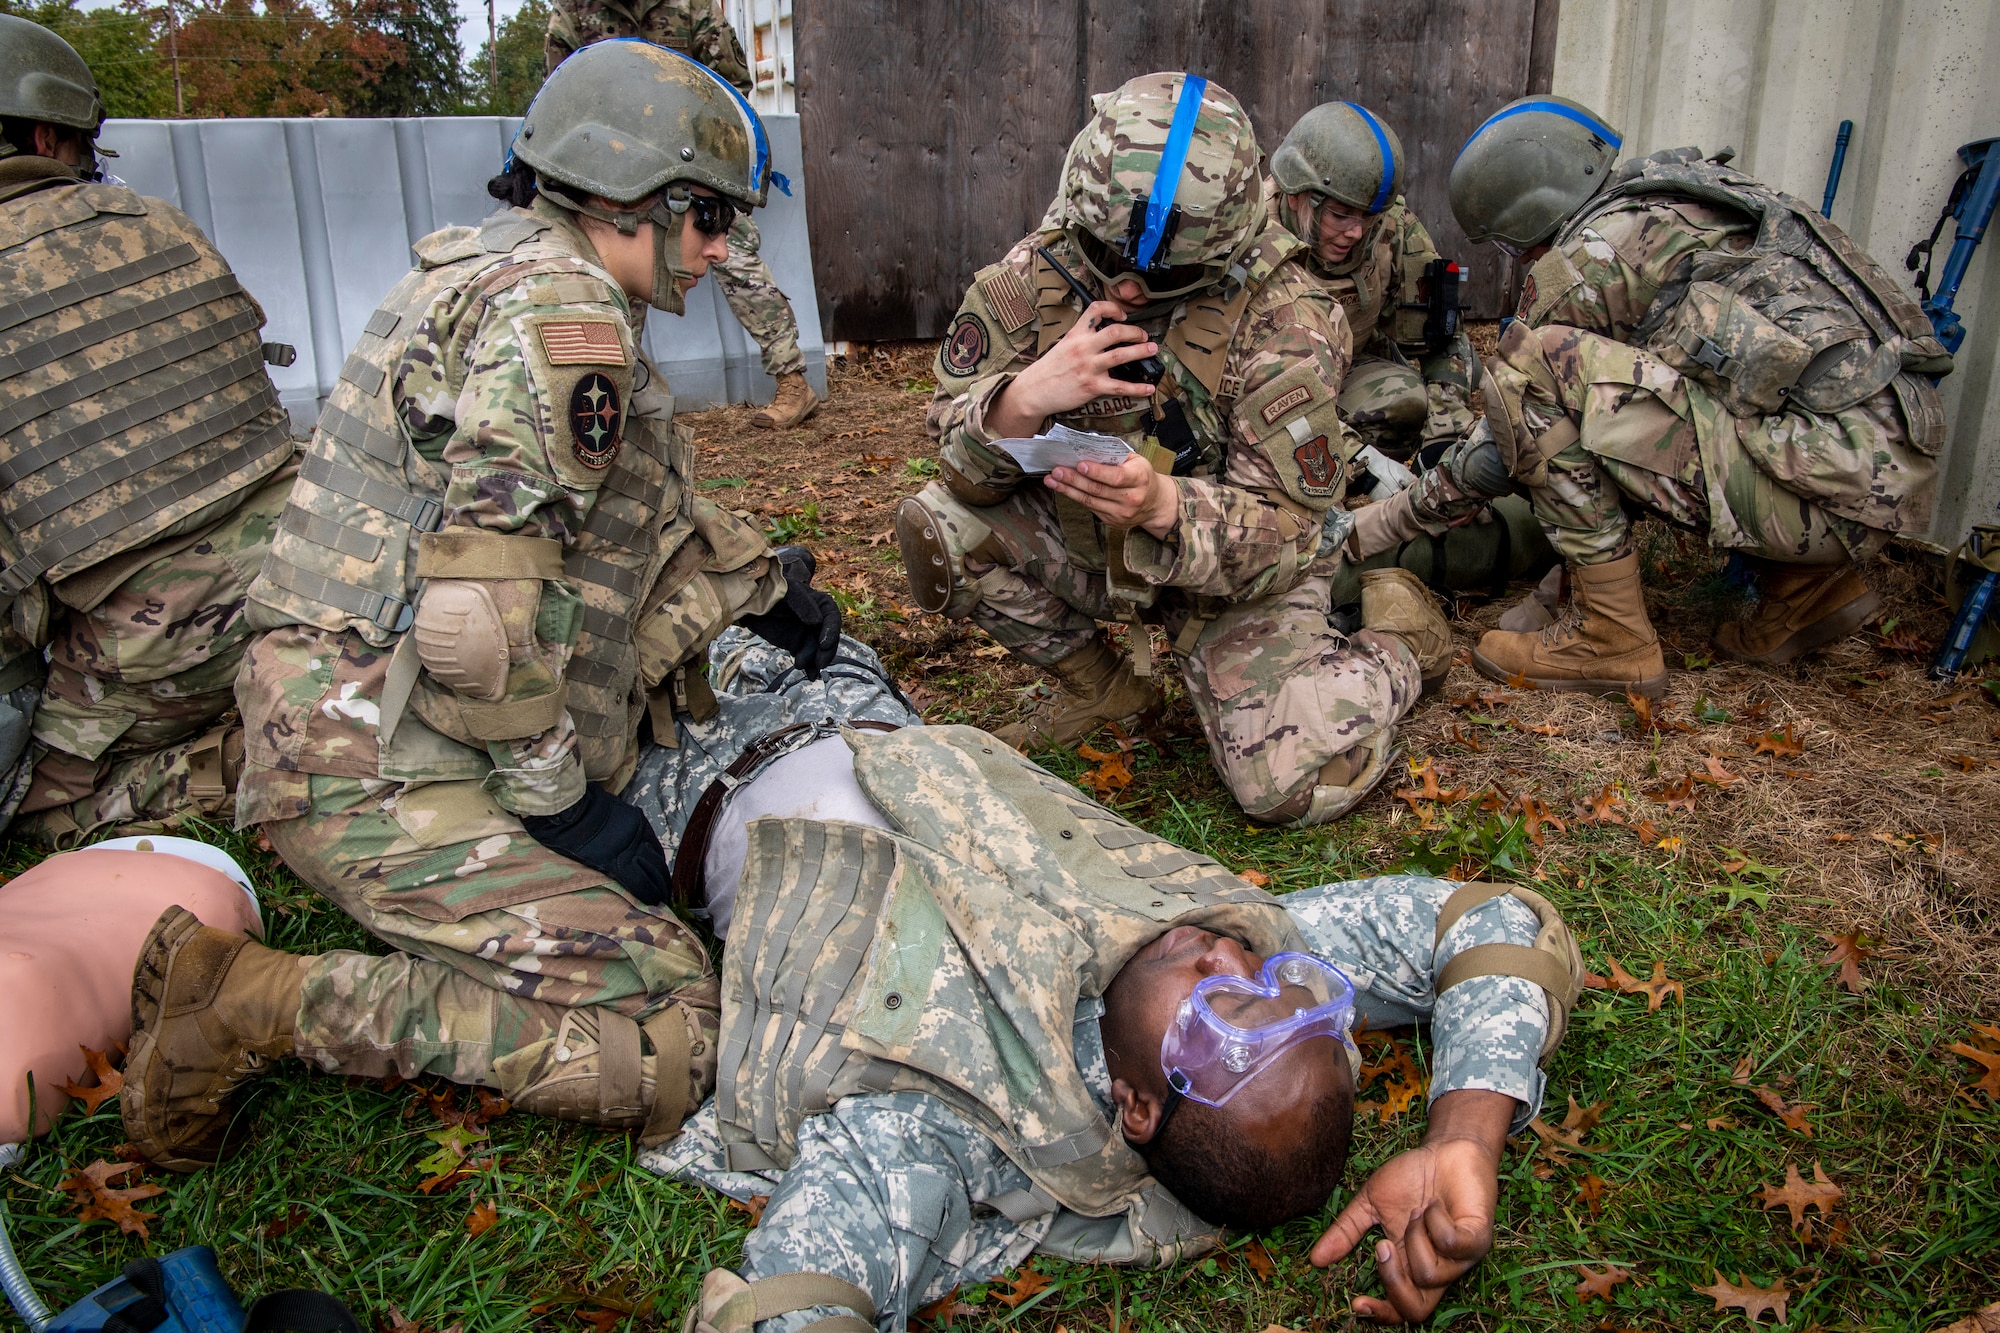 U.S. Airmen from the 514th Air Mobility Wing, Joint Base McGuire-Dix-Lakehurst, New Jersey, and the 171st Air Refueling Wing, Pennsylvania, simulate calling in a nine-line while providing patient care and transport during Tactical Combat Casualty Care training at the Medical Simulation and Training Center at JB MDL, N.J., October 31, 2021. True to the concept of Air Force Total Force Integration, reserve, guard, and active duty squadrons came together to participate in this potentially life-saving course.